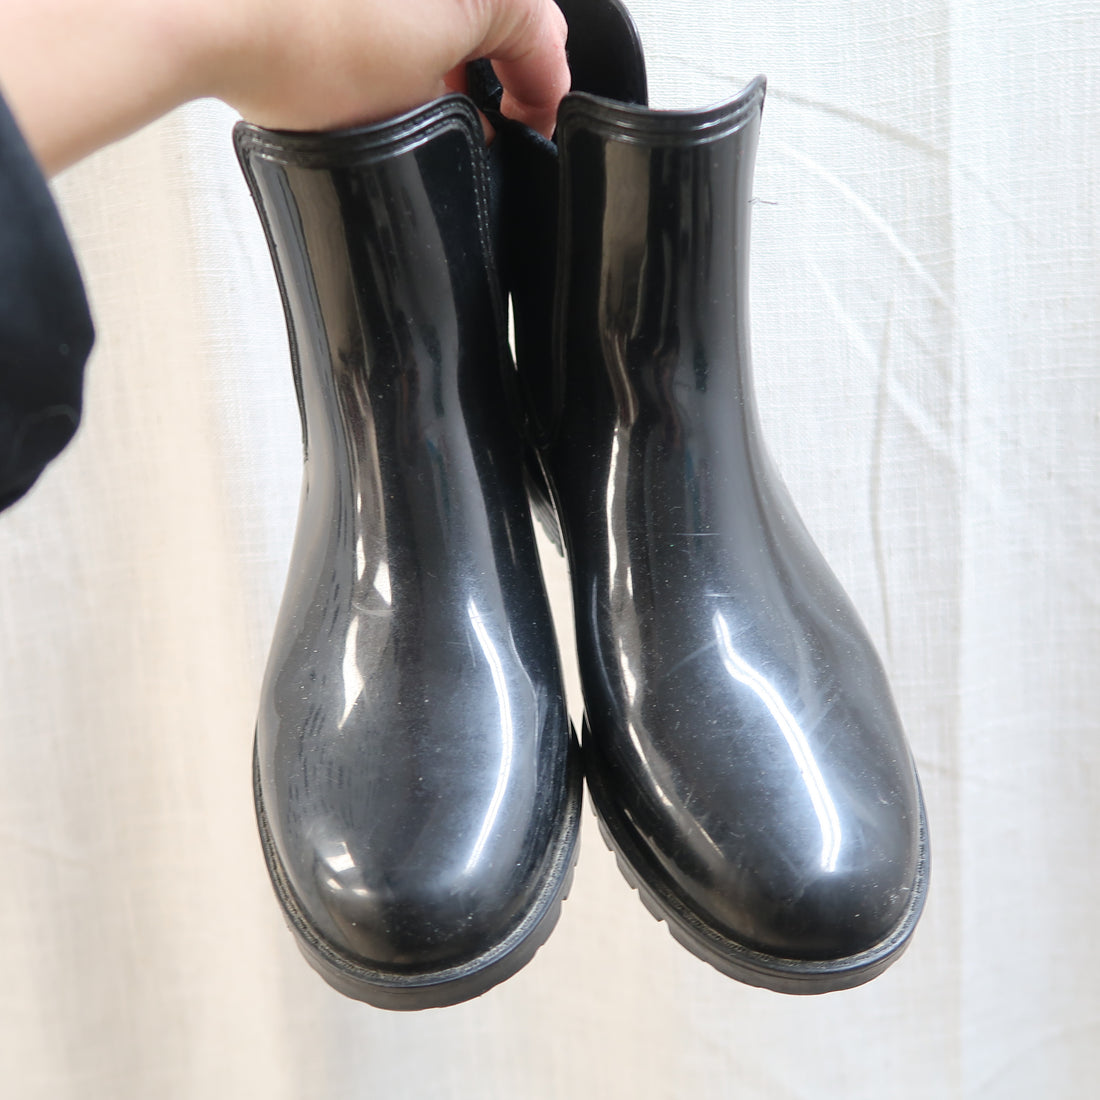 Unknown Brand - Rubber Boots (Women&